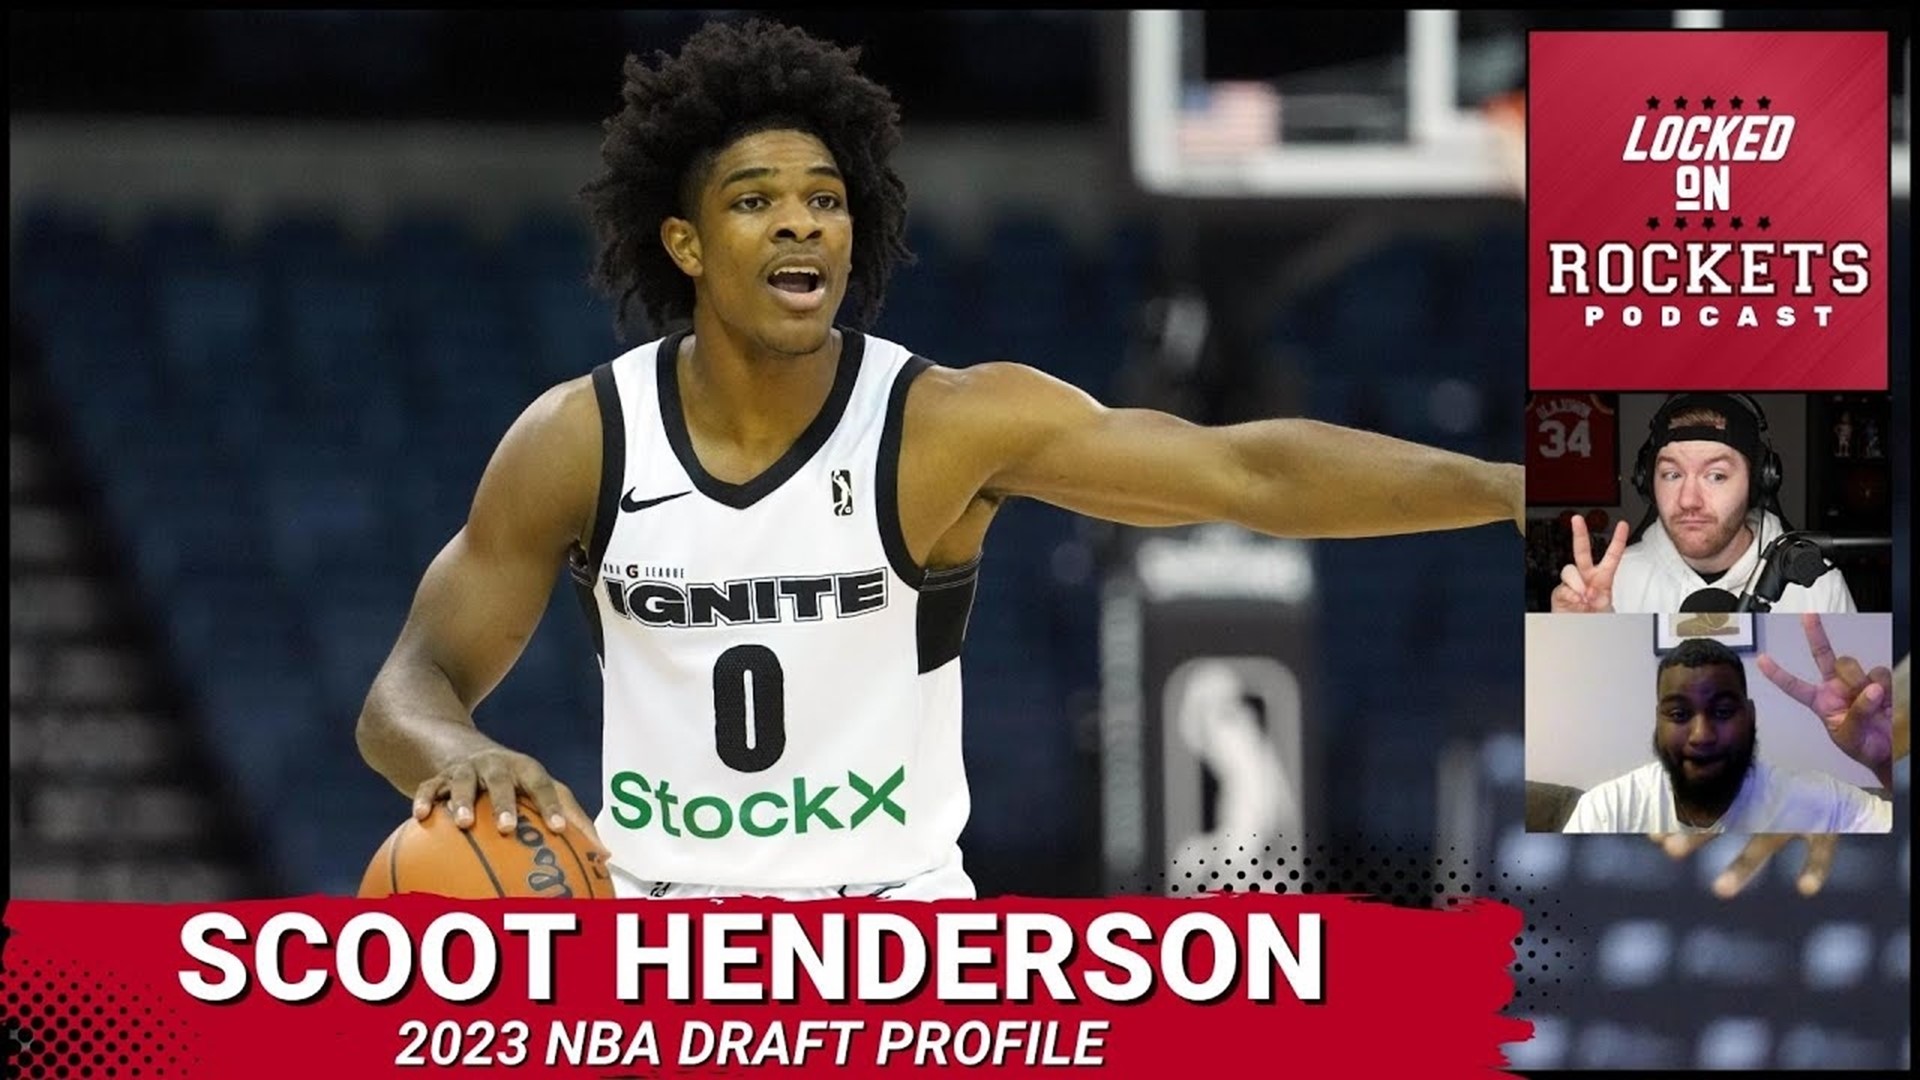 Host Jackson Gatlin (@JTGatlin) is joined by weekly cohost and NBA draft enthusiast Madison Moore (@MadManLeaks) to break down and discuss Scoot Henderson